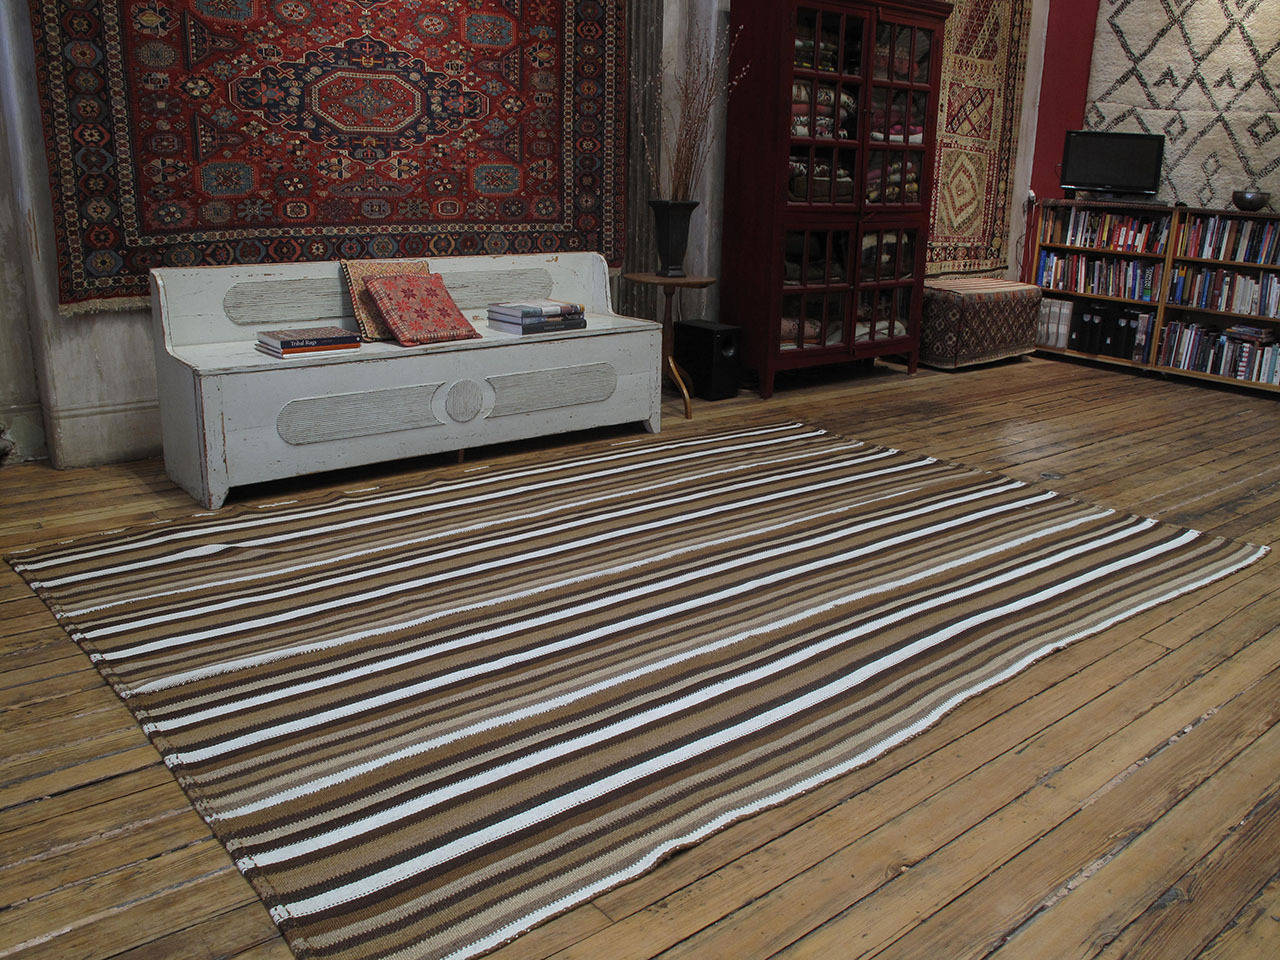 Kilim rug with vertical stripes. A beautiful old tribal Kilim rug from South Eastern Turkey woven with wool in alternating tones of natural brown and white cotton. Most likely intended as a simple, everyday floor cover or rug, it has wonderful